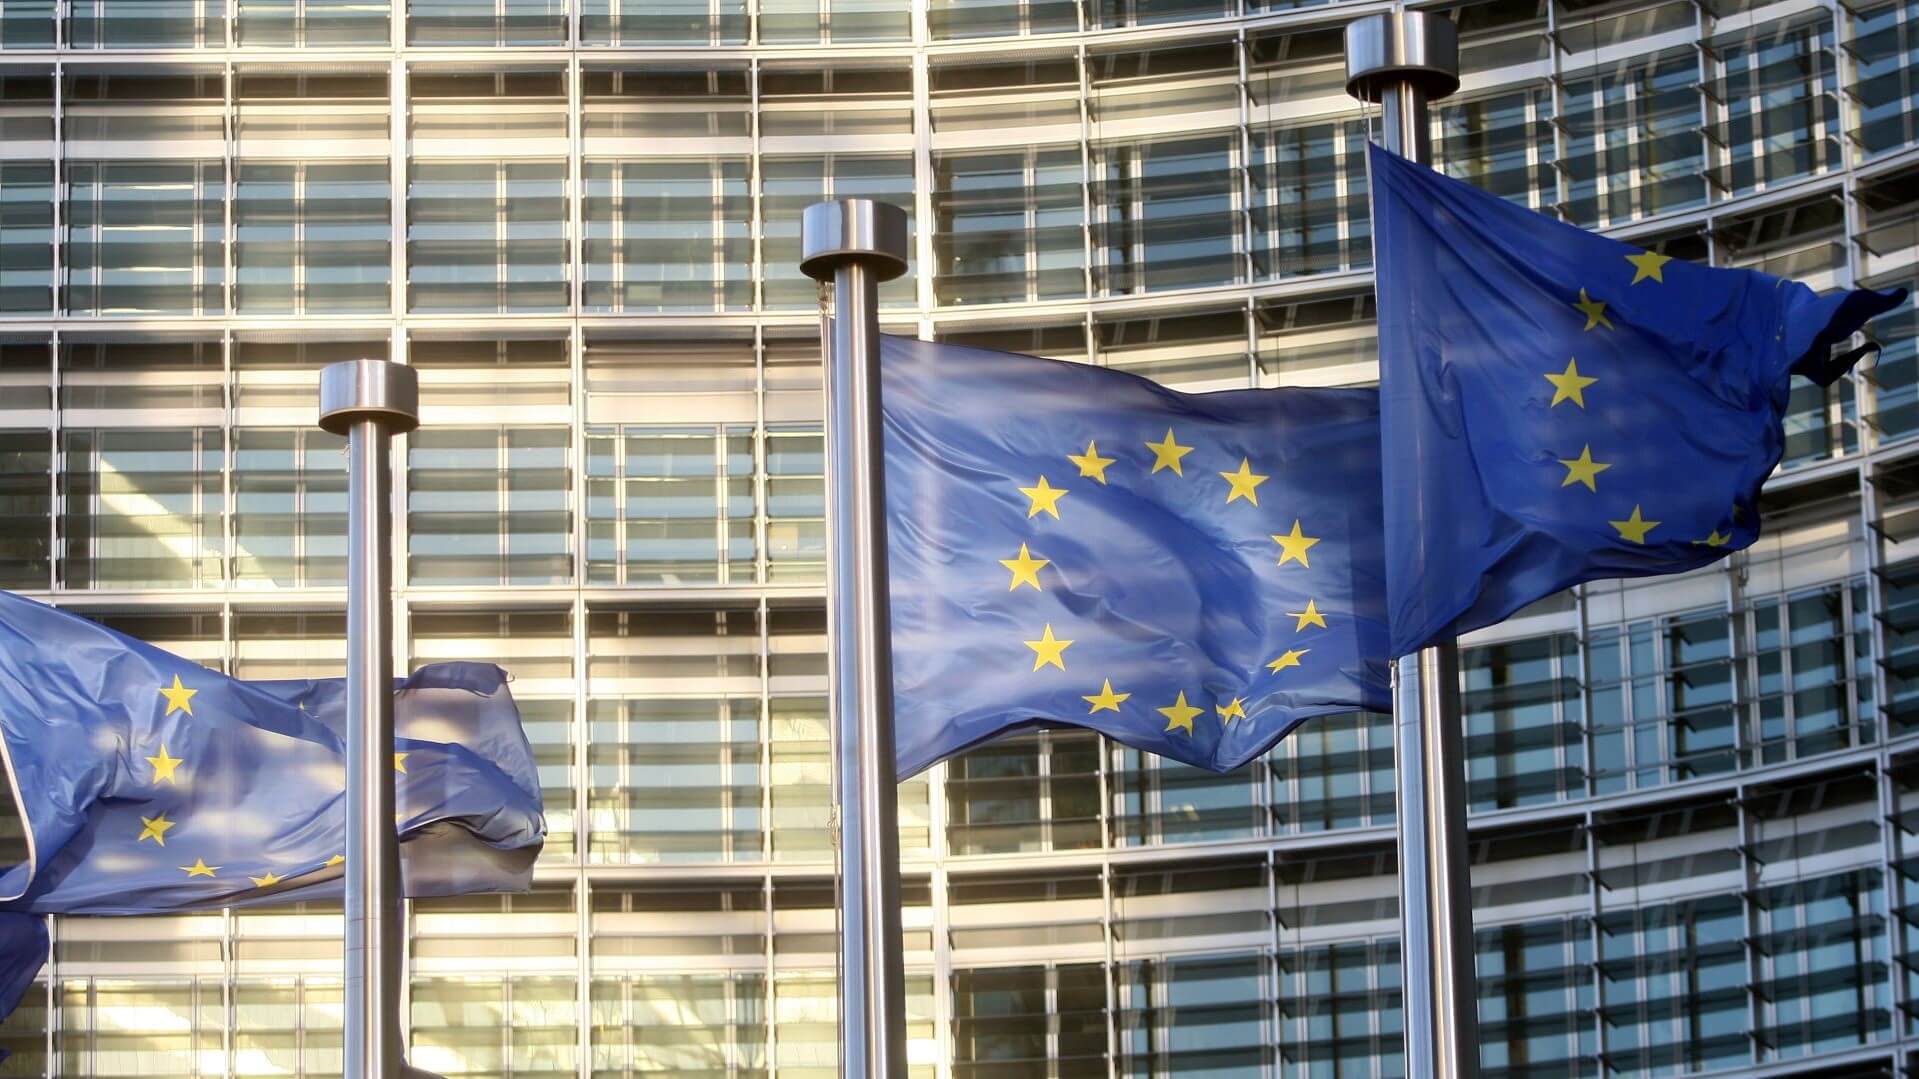 European Commission flags flying